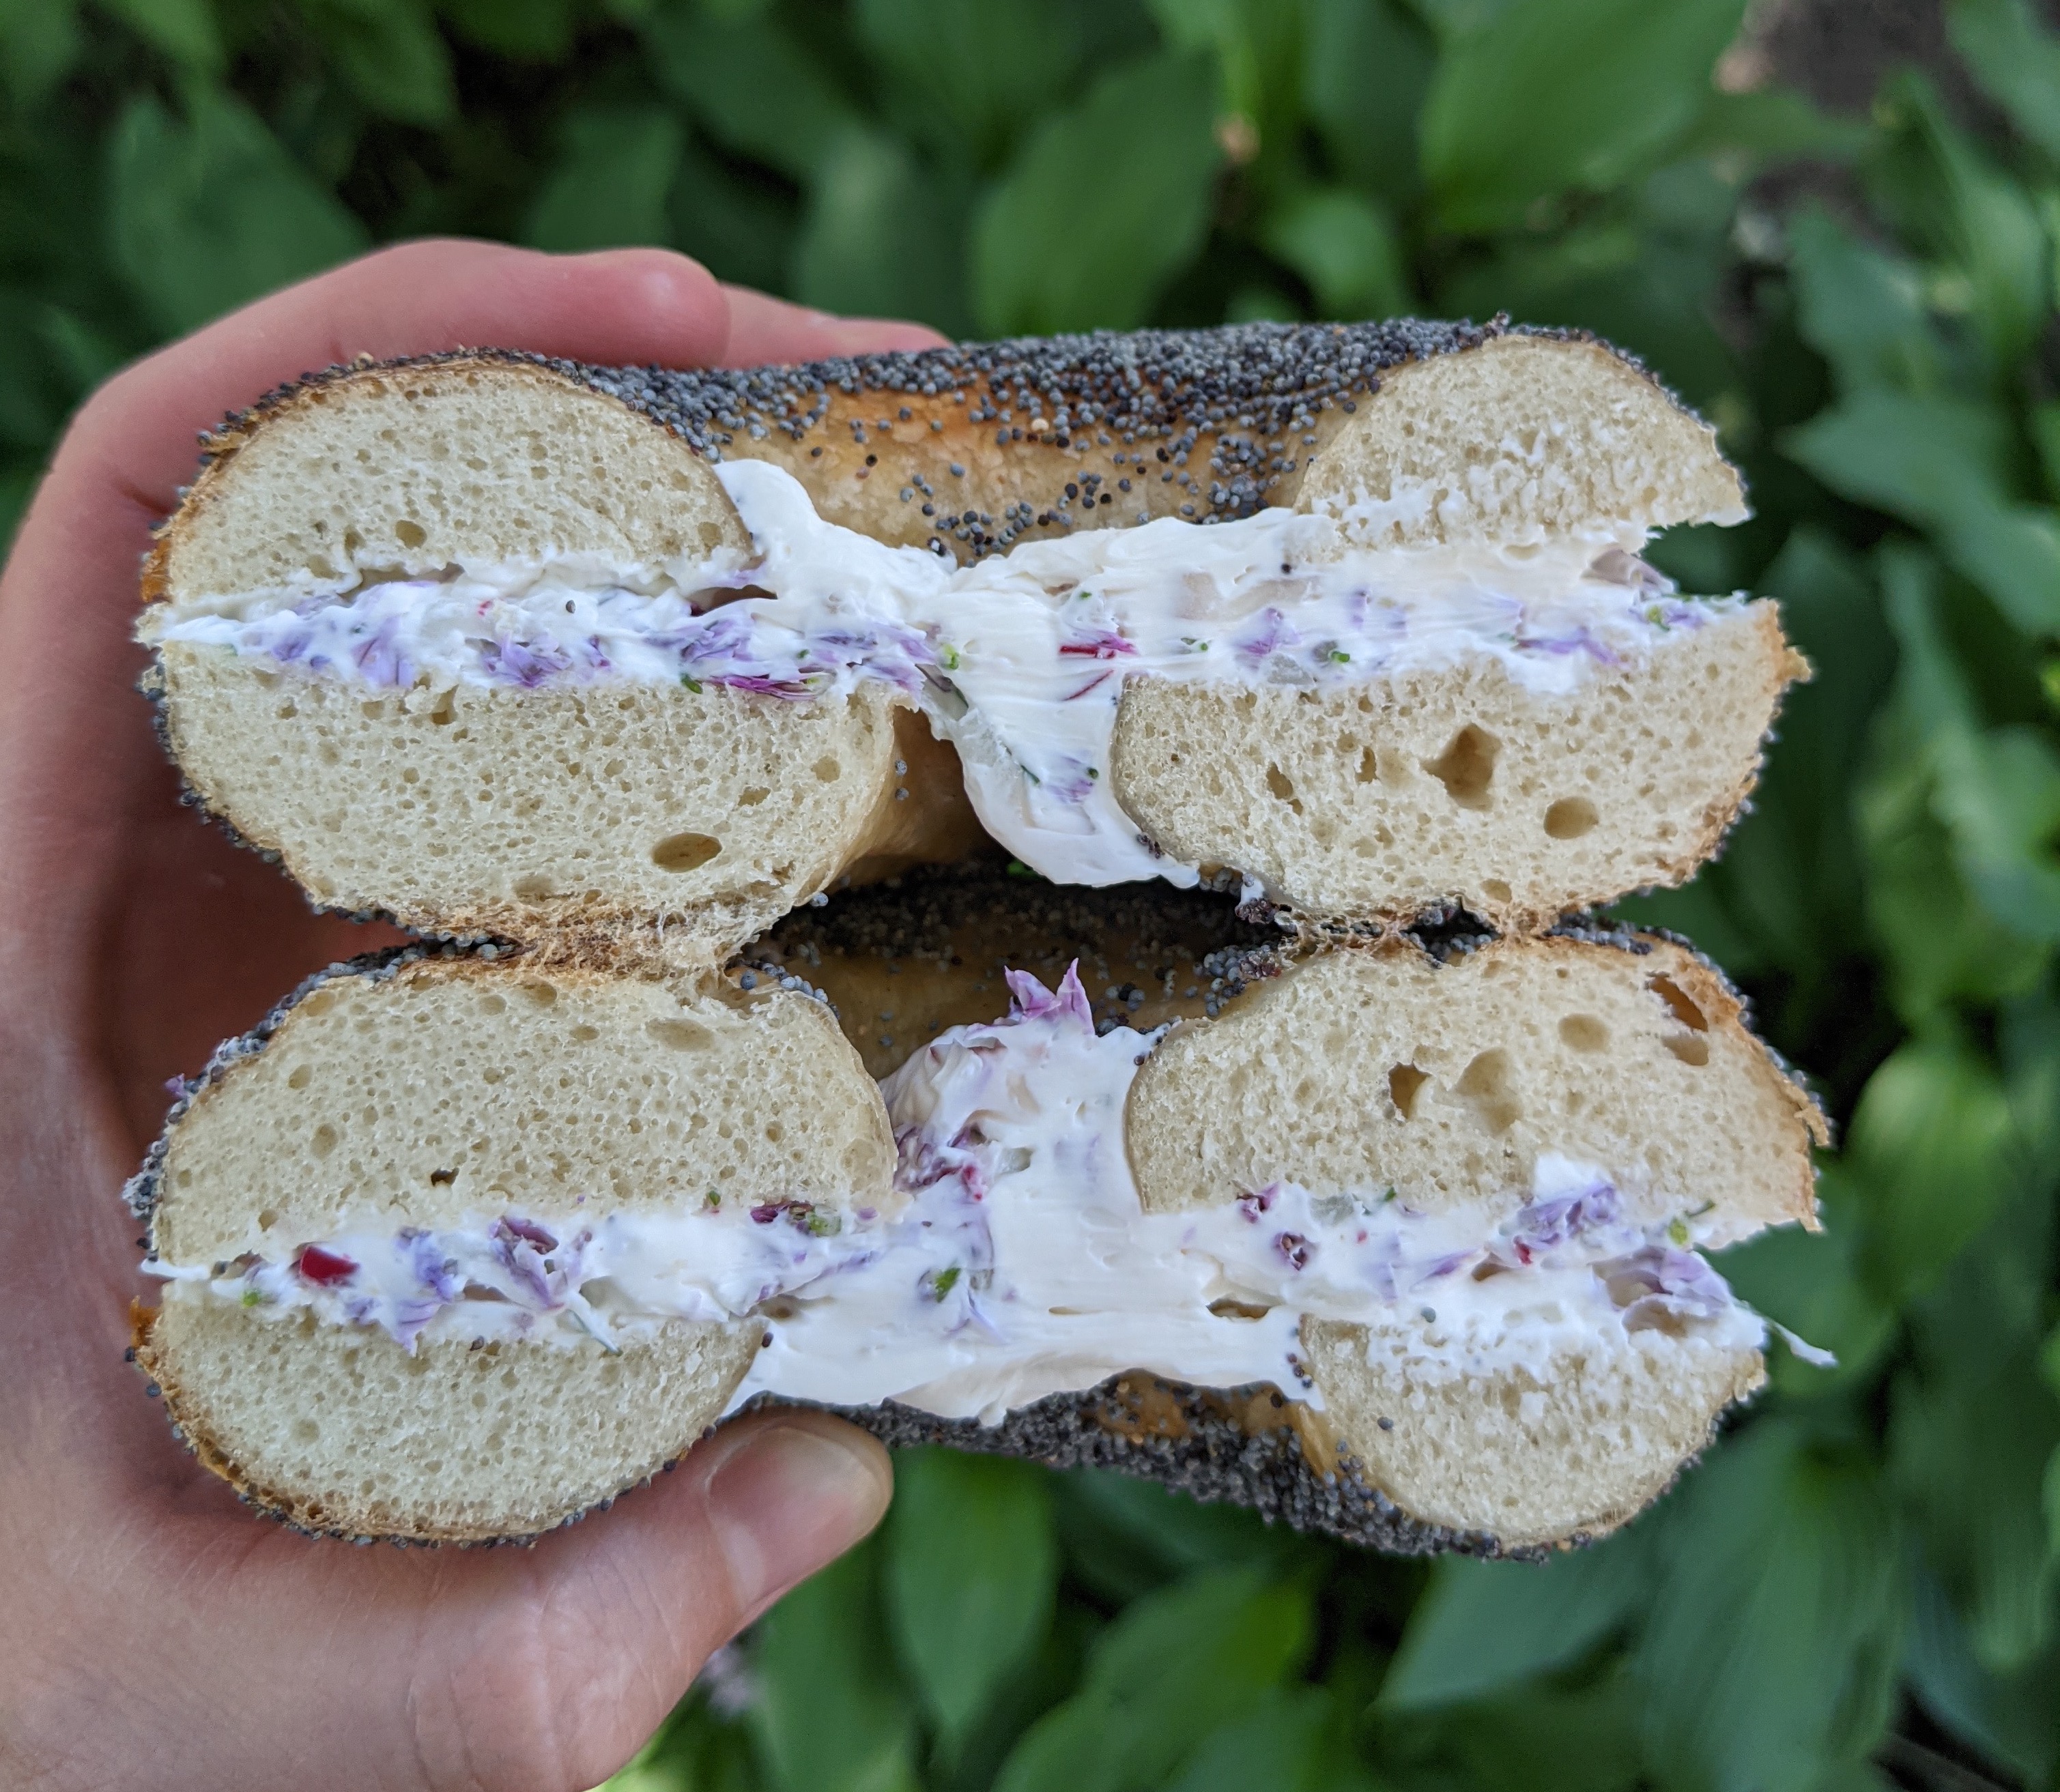 A hand holding a poppyseed bagel cut in half with chive blossom and radish cream cheese.  